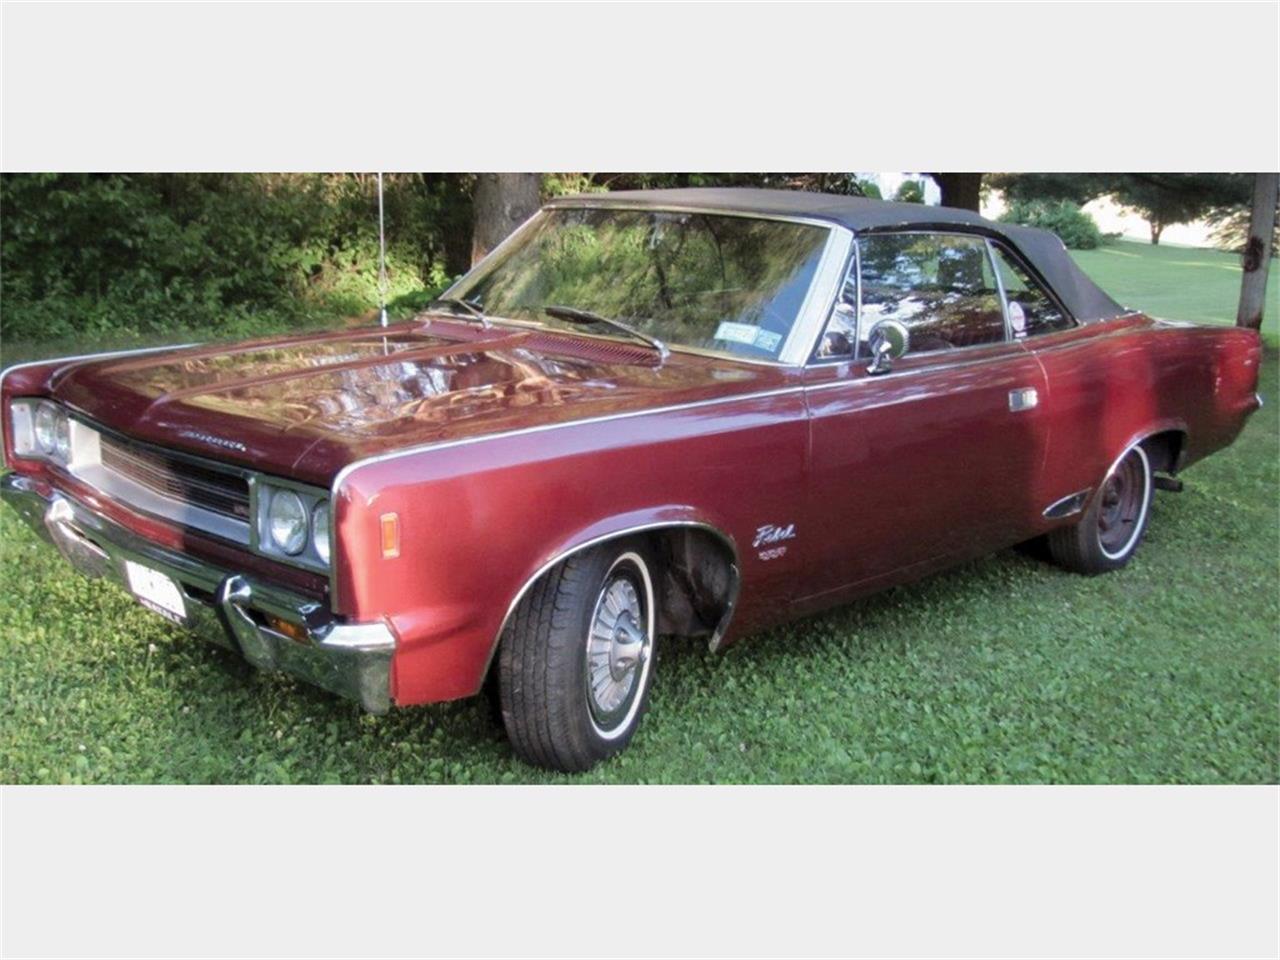 29+ 1968 amc rebel sst convertible for sale high quality